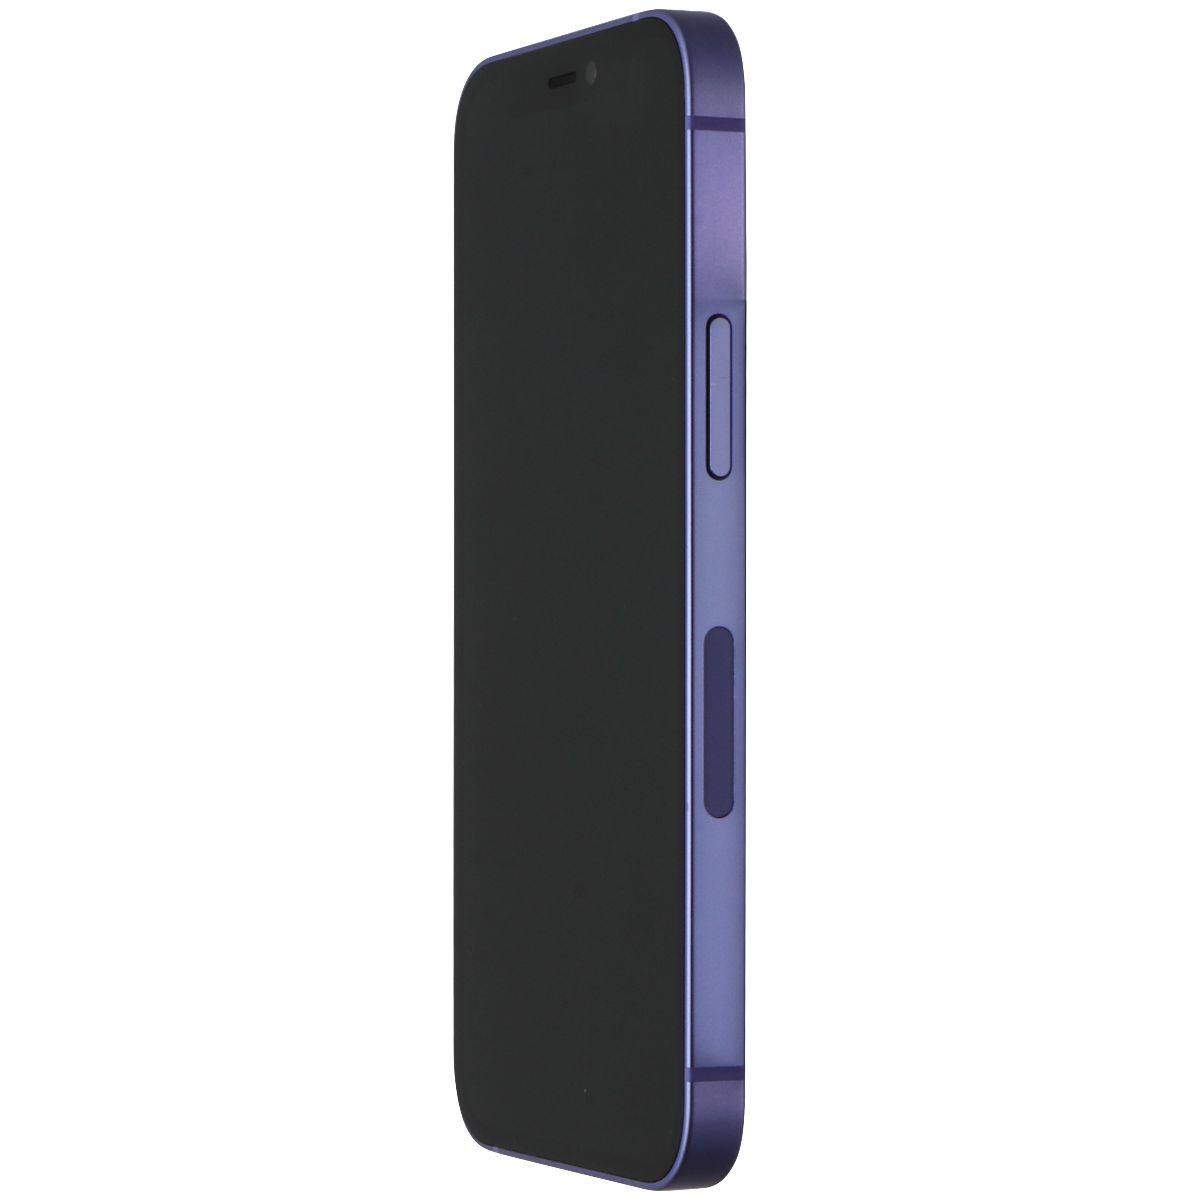 Apple iPhone 12 mini (5.4-inch) Smartphone (A2176) AT&T Only - 64GB/Purple Cell Phones & Smartphones Apple    - Simple Cell Bulk Wholesale Pricing - USA Seller